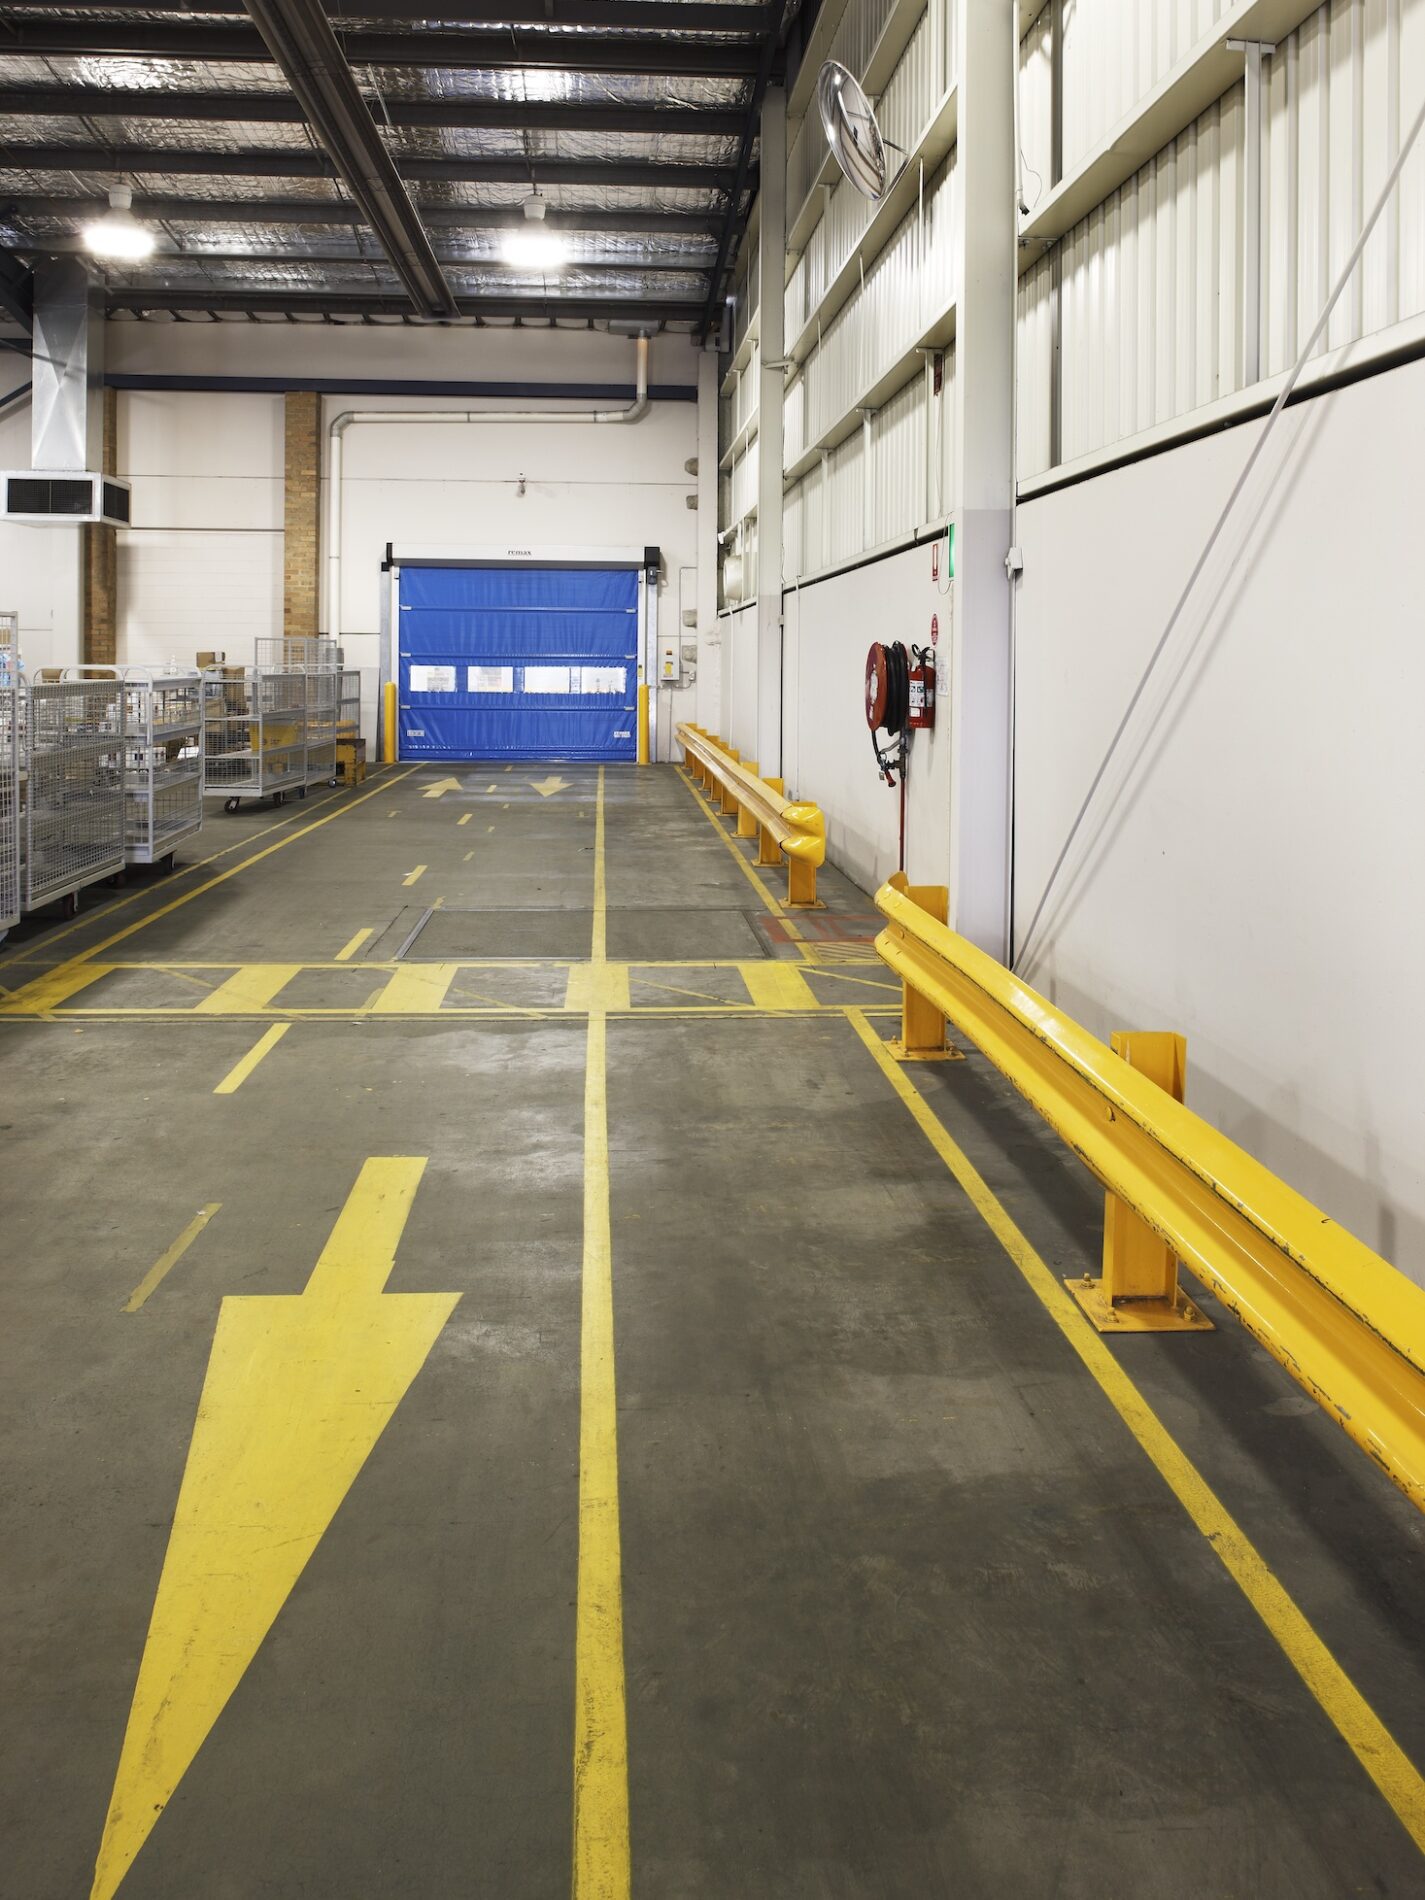 Australia Post warehouse entry and exit way from roller door with yellow barriers and yellow line markings